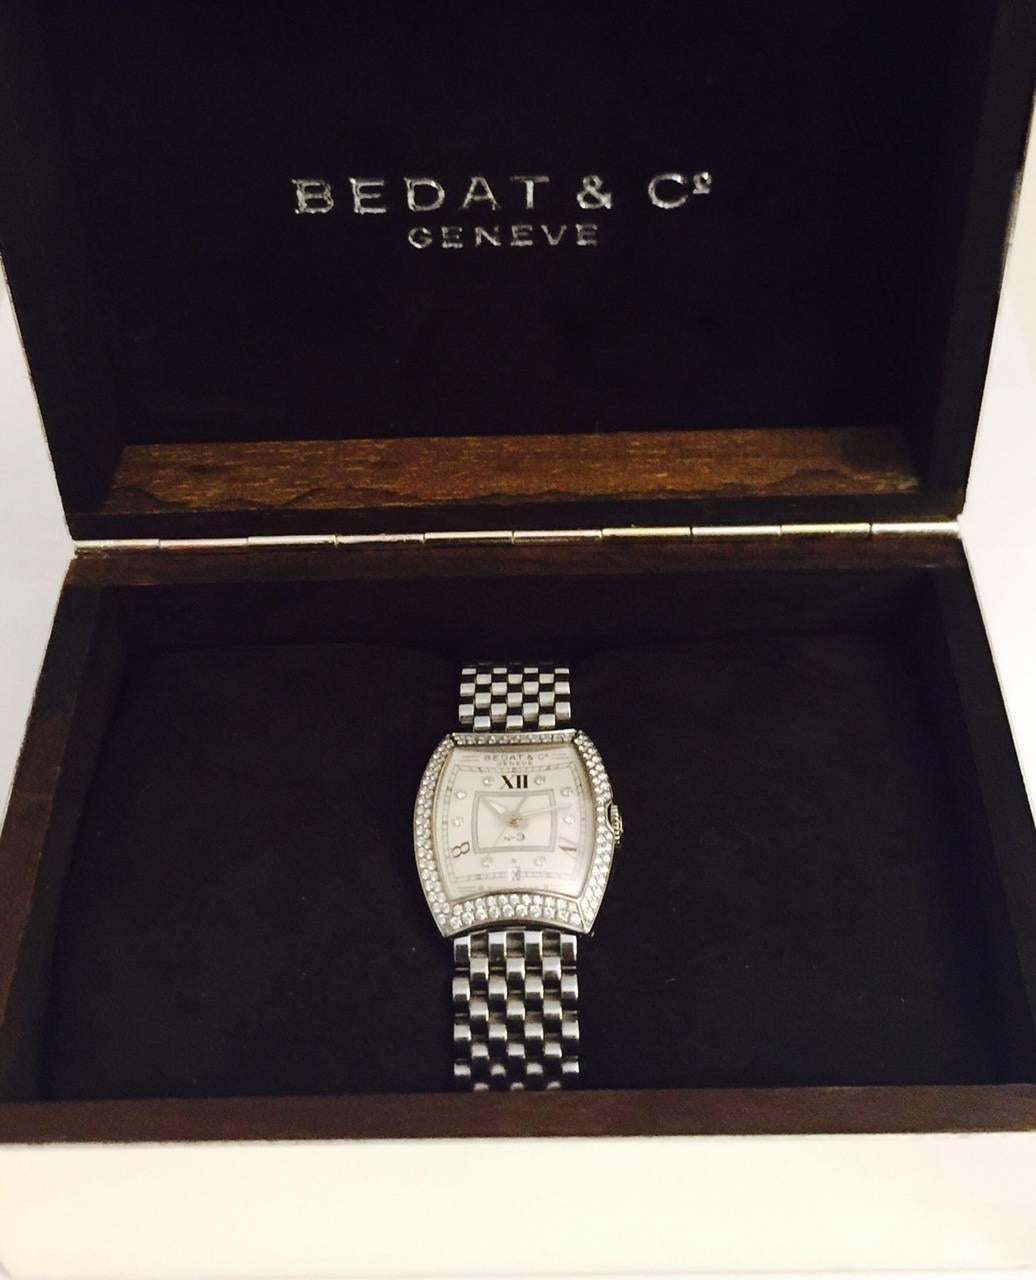 Bedat & Co. #3 Ladies Stainless Steel Diamond Automatic Wristwatch For Sale 3